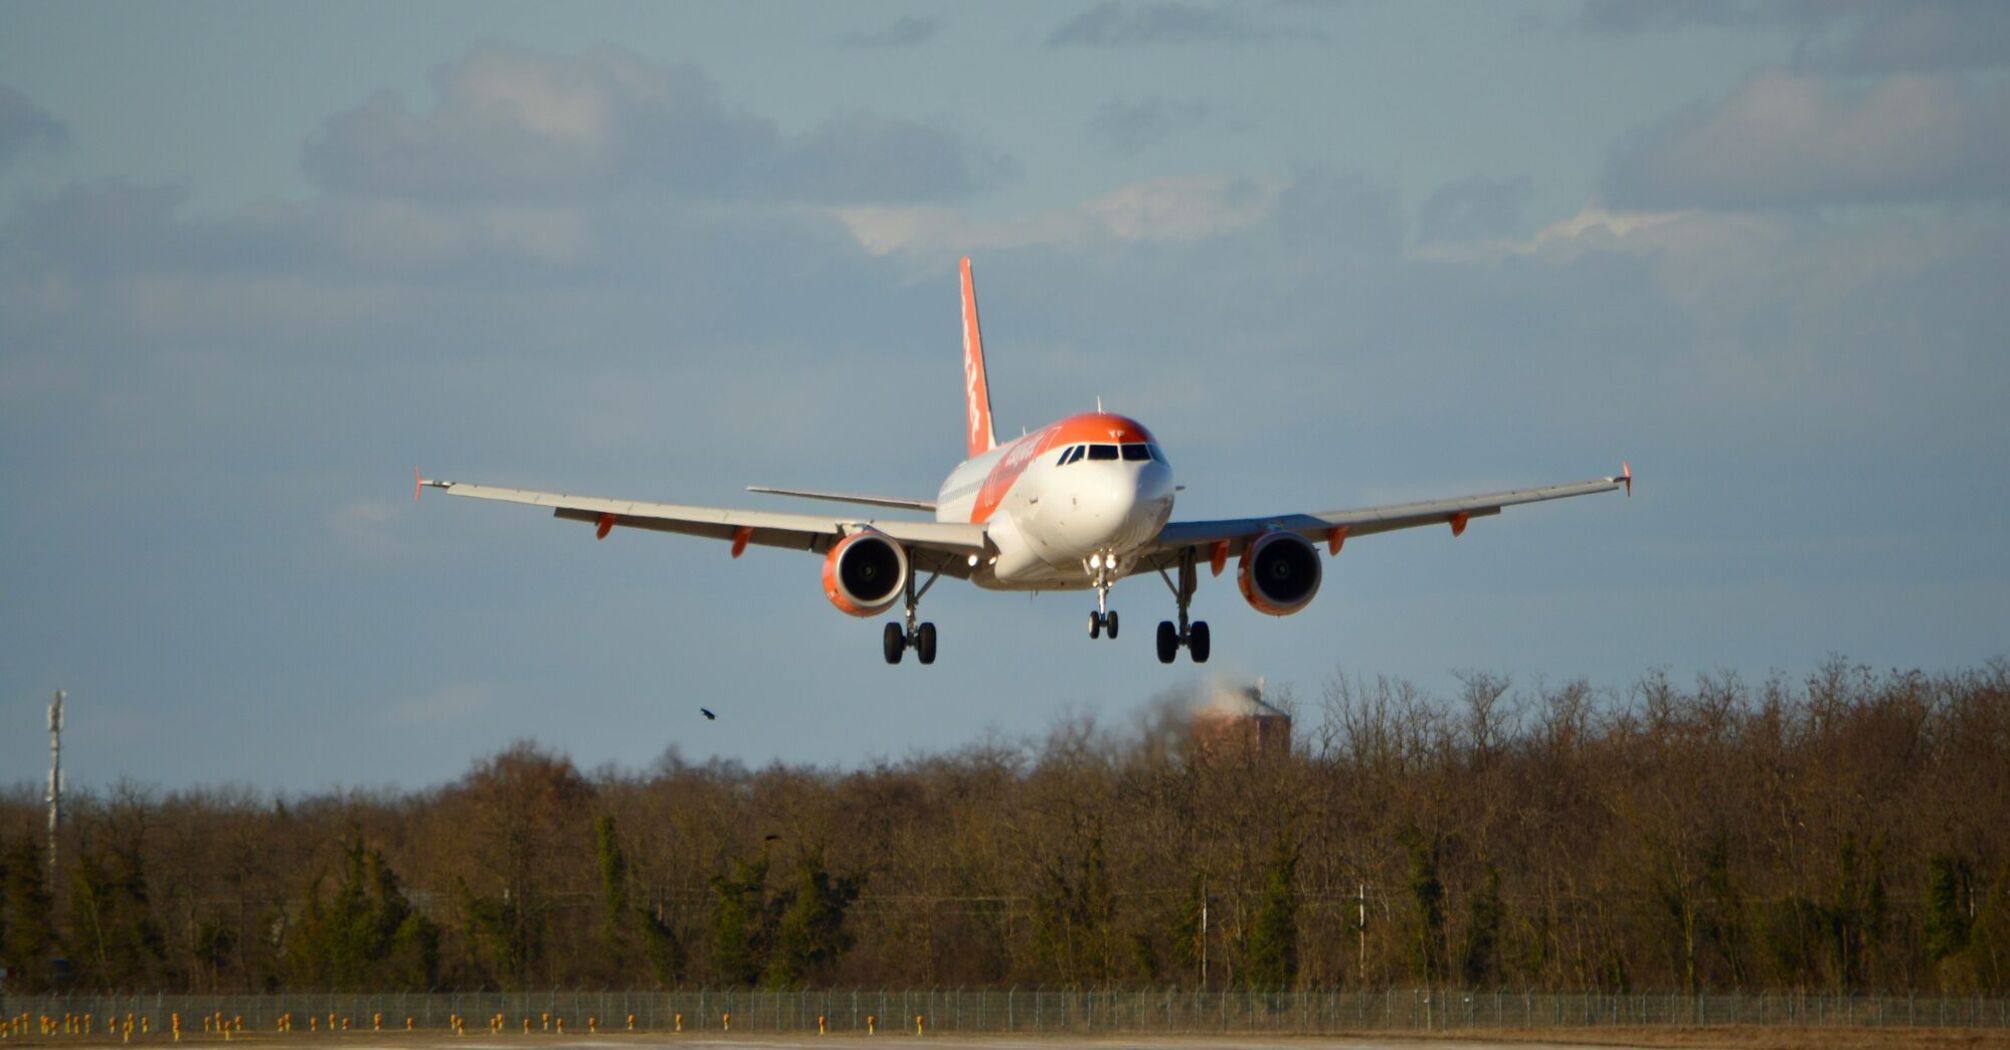 The EasyJet plane made an emergency landing in Manchester due to a passenger falling ill